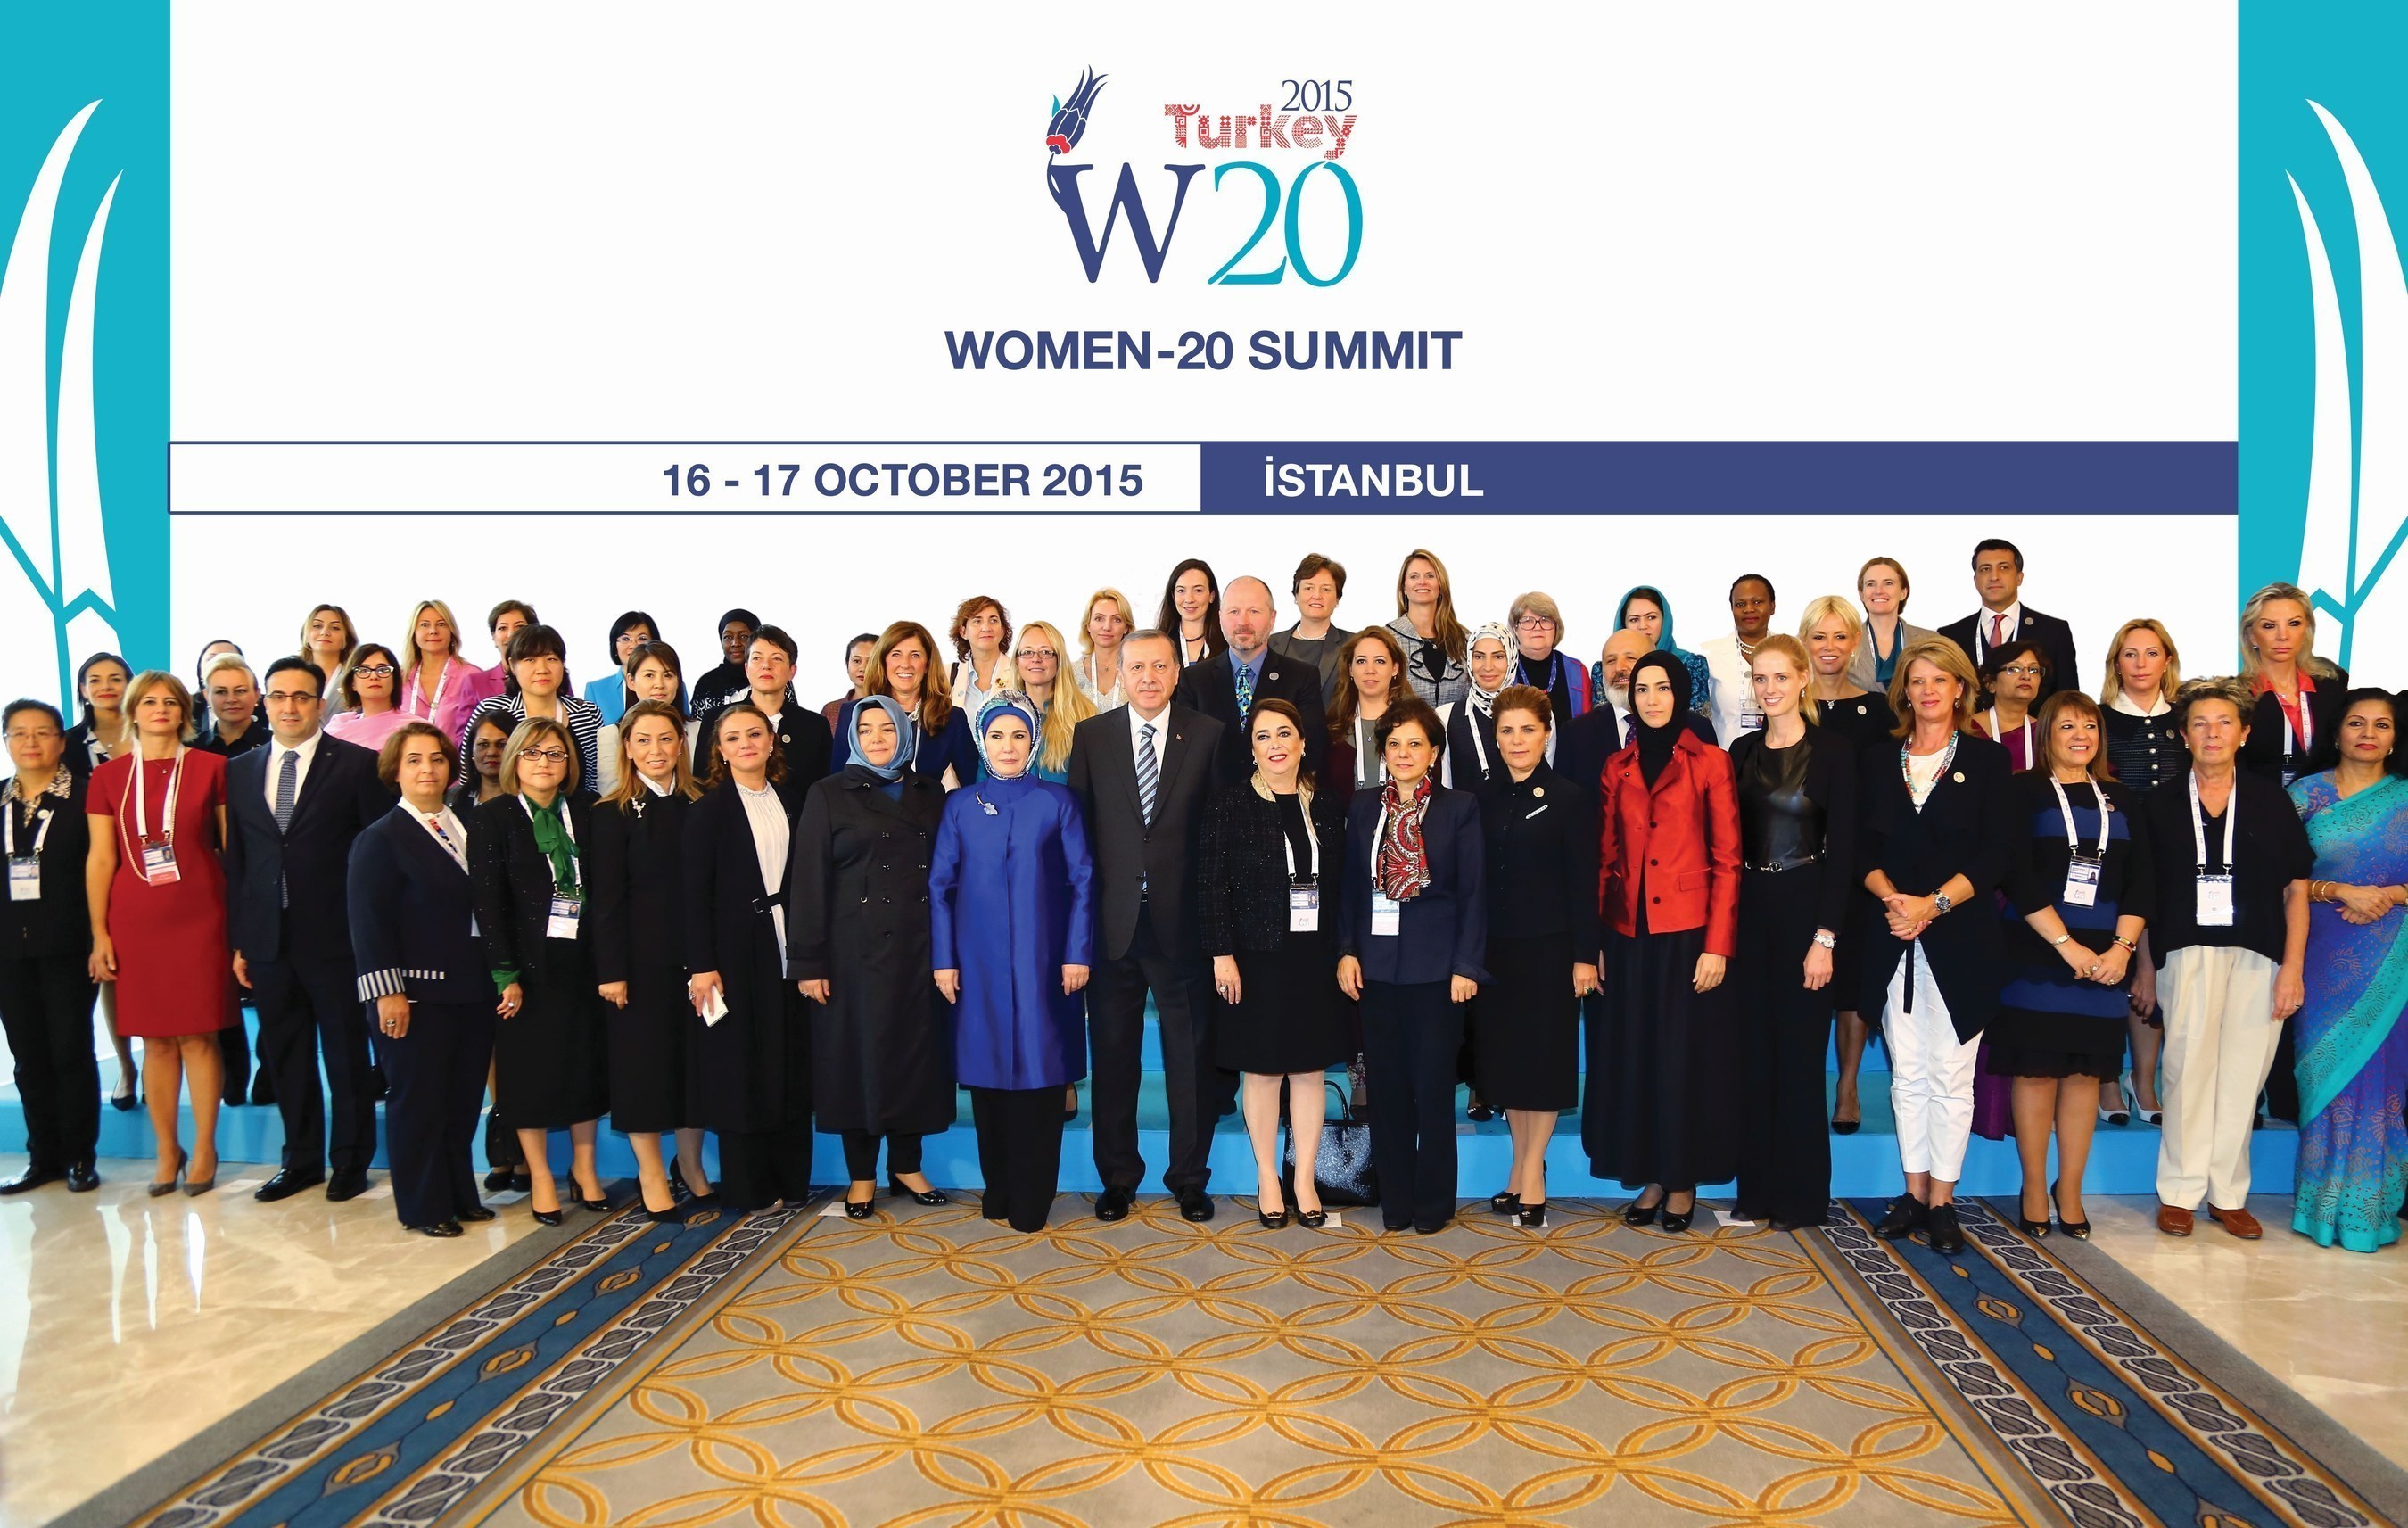 Expressing his belief that the W20 would greatly contribute to the G20 agenda with its studies and propositions in terms of providing fairer conditions for women's presence in economy, President ErdoÃ„Å¸an drew attention to "inclusive growth", one of Turkey's G20 goals. "One of the most important aspects of inclusiveness, which means everyone should get a share of economic growth and welfare, is that women get the position they deserve in economy," President Erdogan said and he stated that the female workforce of G20 countries was currently at 58% while male workforce was at 86%. The President underlined that women should be included in the workforce to achieve high-growth rate. (PRNewsFoto/G20 Turkish Presidency) (PRNewsFoto/G20 Turkish Presidency)